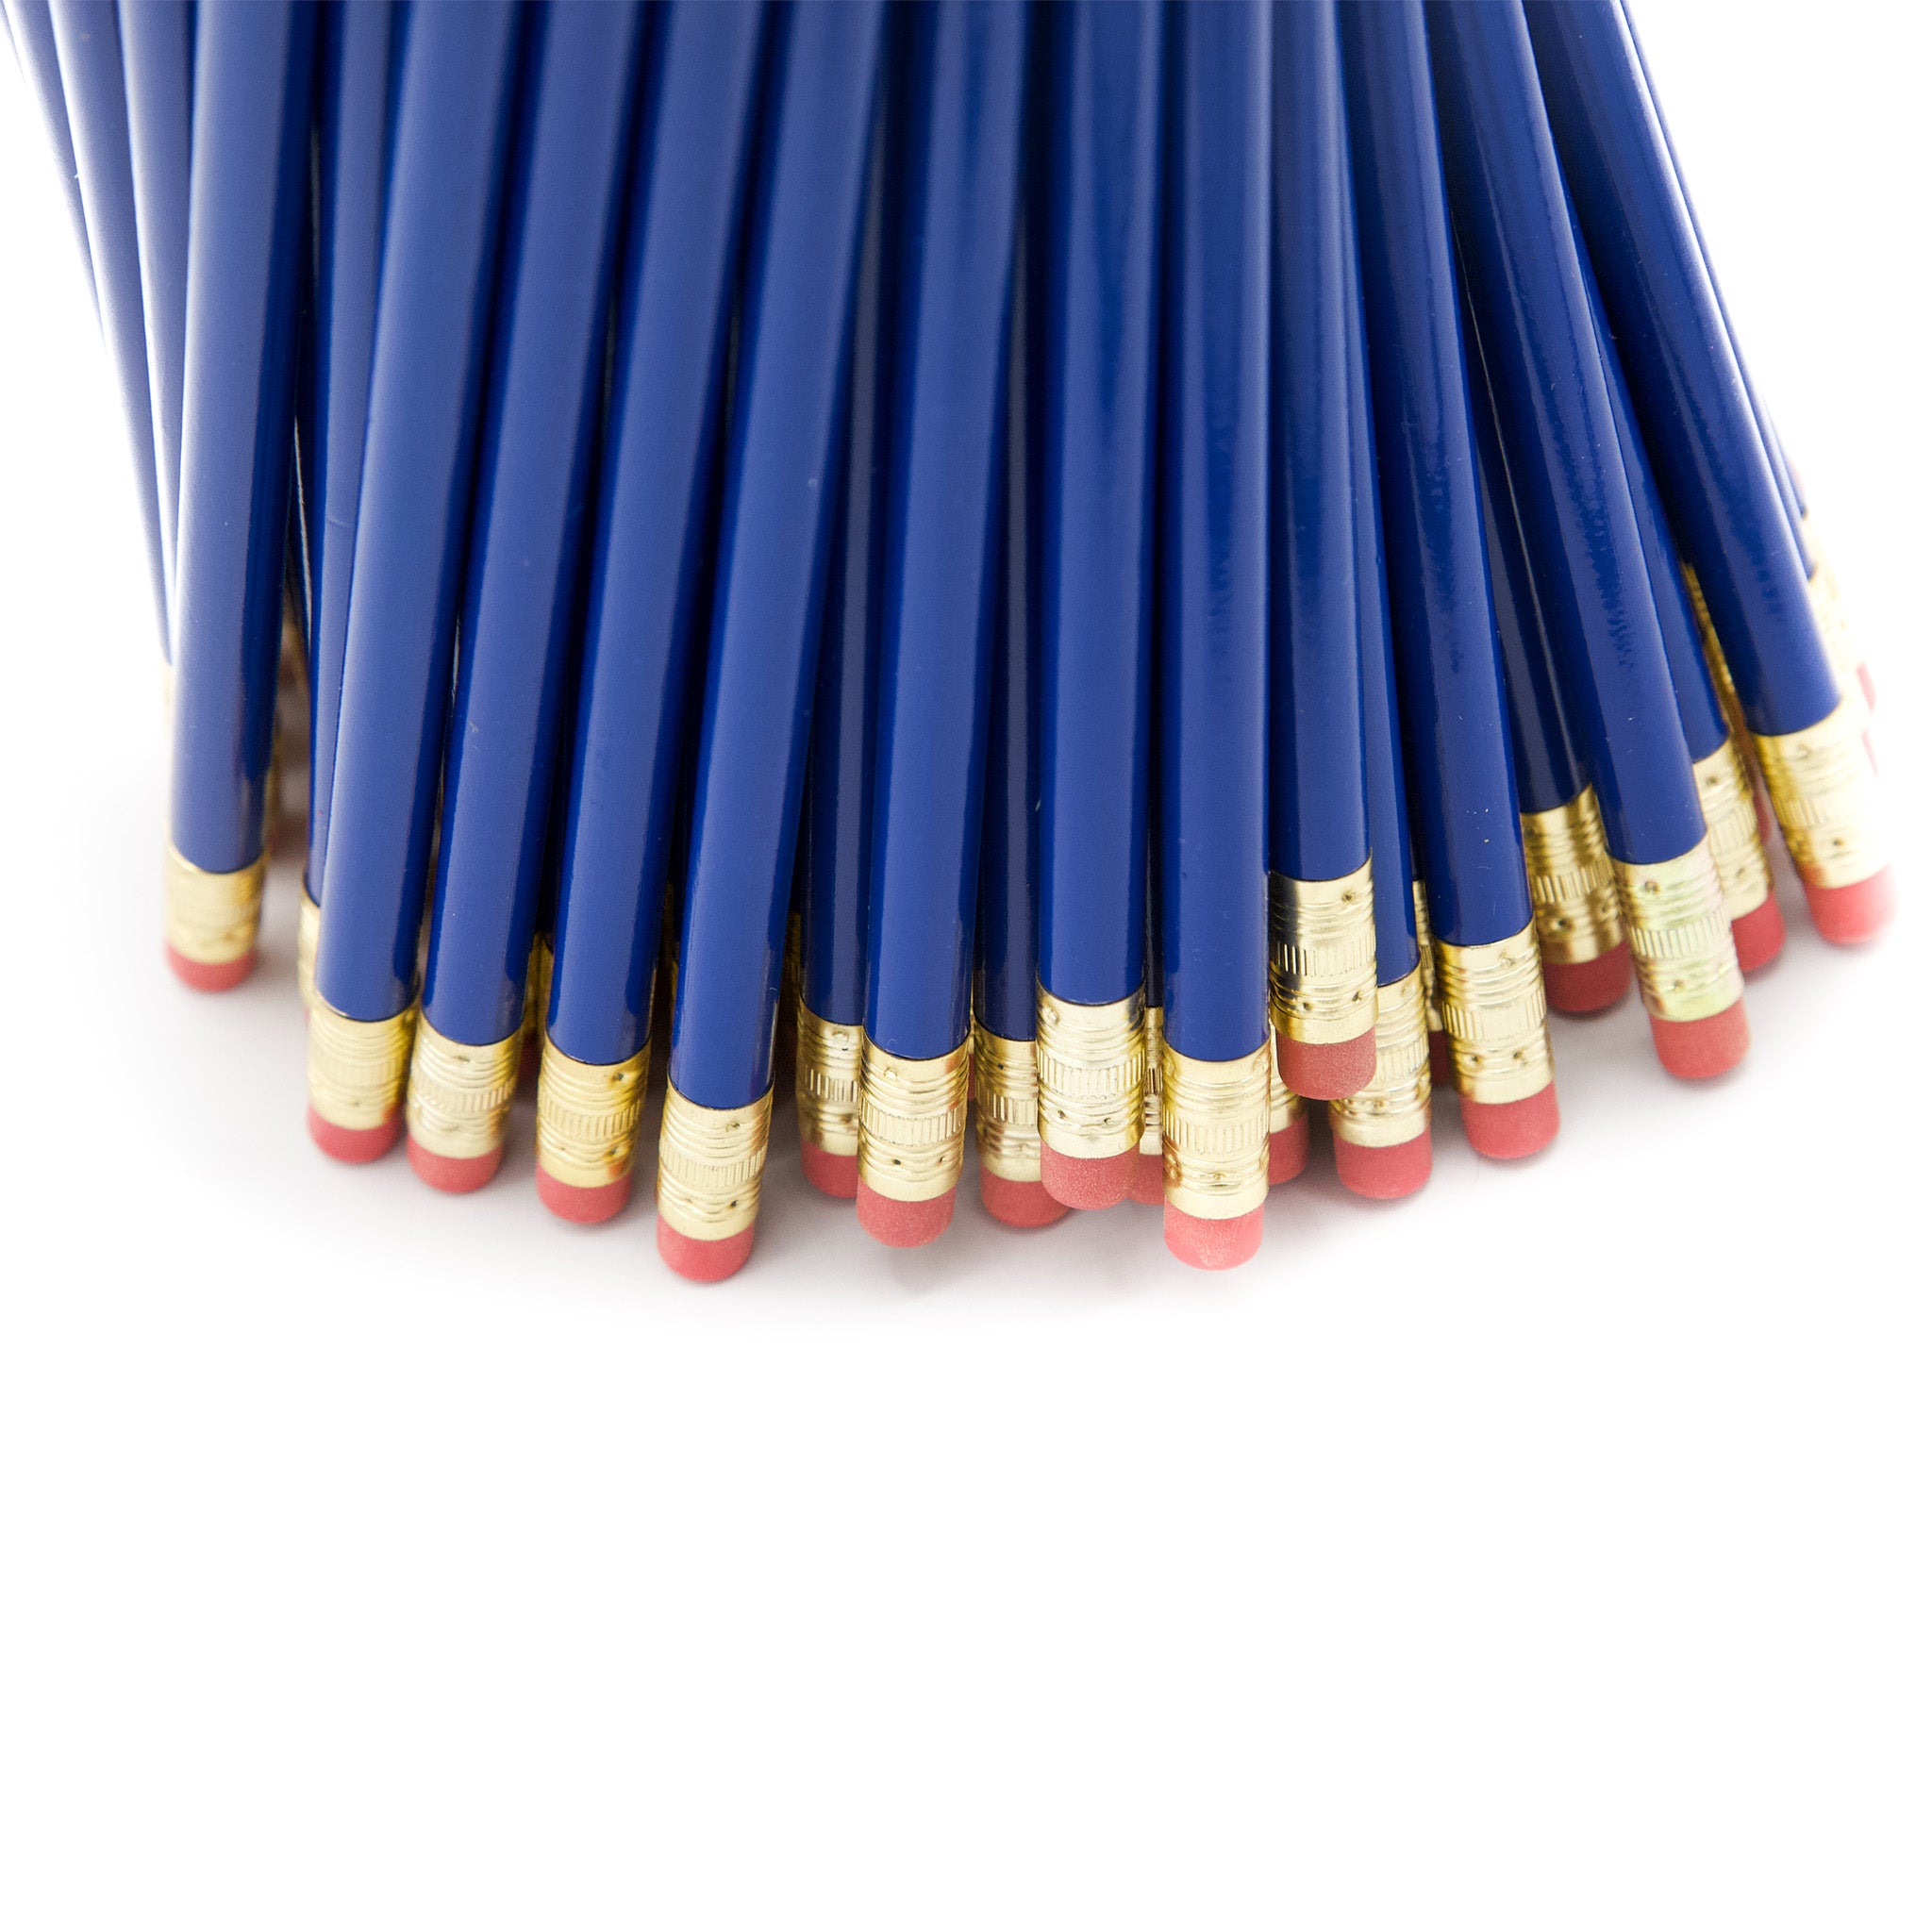 Made in the USA Blank Pencil - Round - 144 Pencils – Musgrave Pencil Company